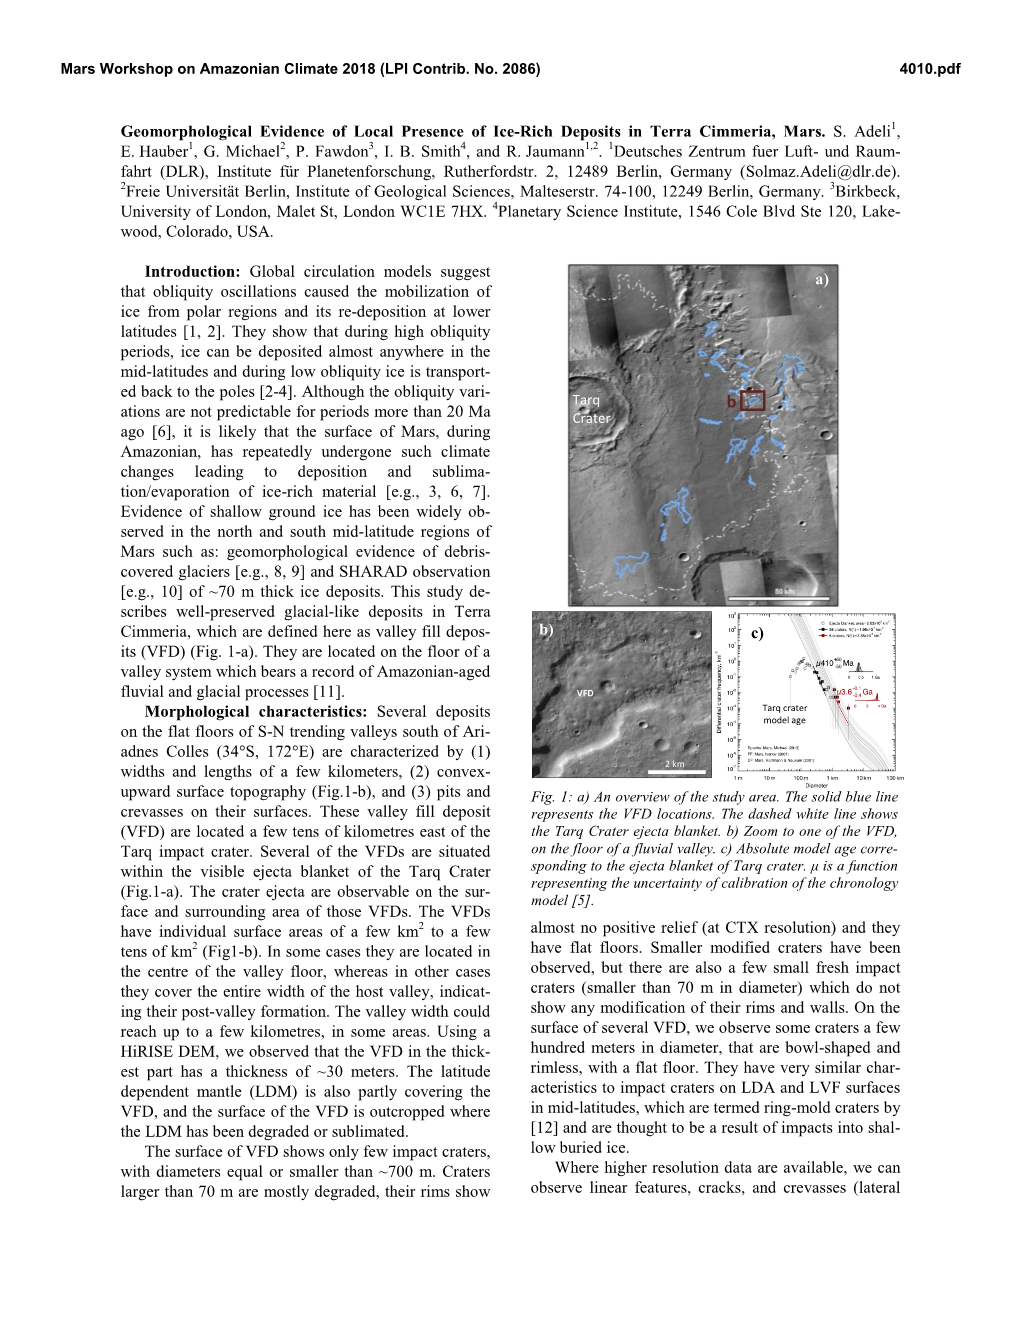 Geomorphological Evidence of Local Presence of Ice-Rich Deposits in Terra Cimmeria, Mars